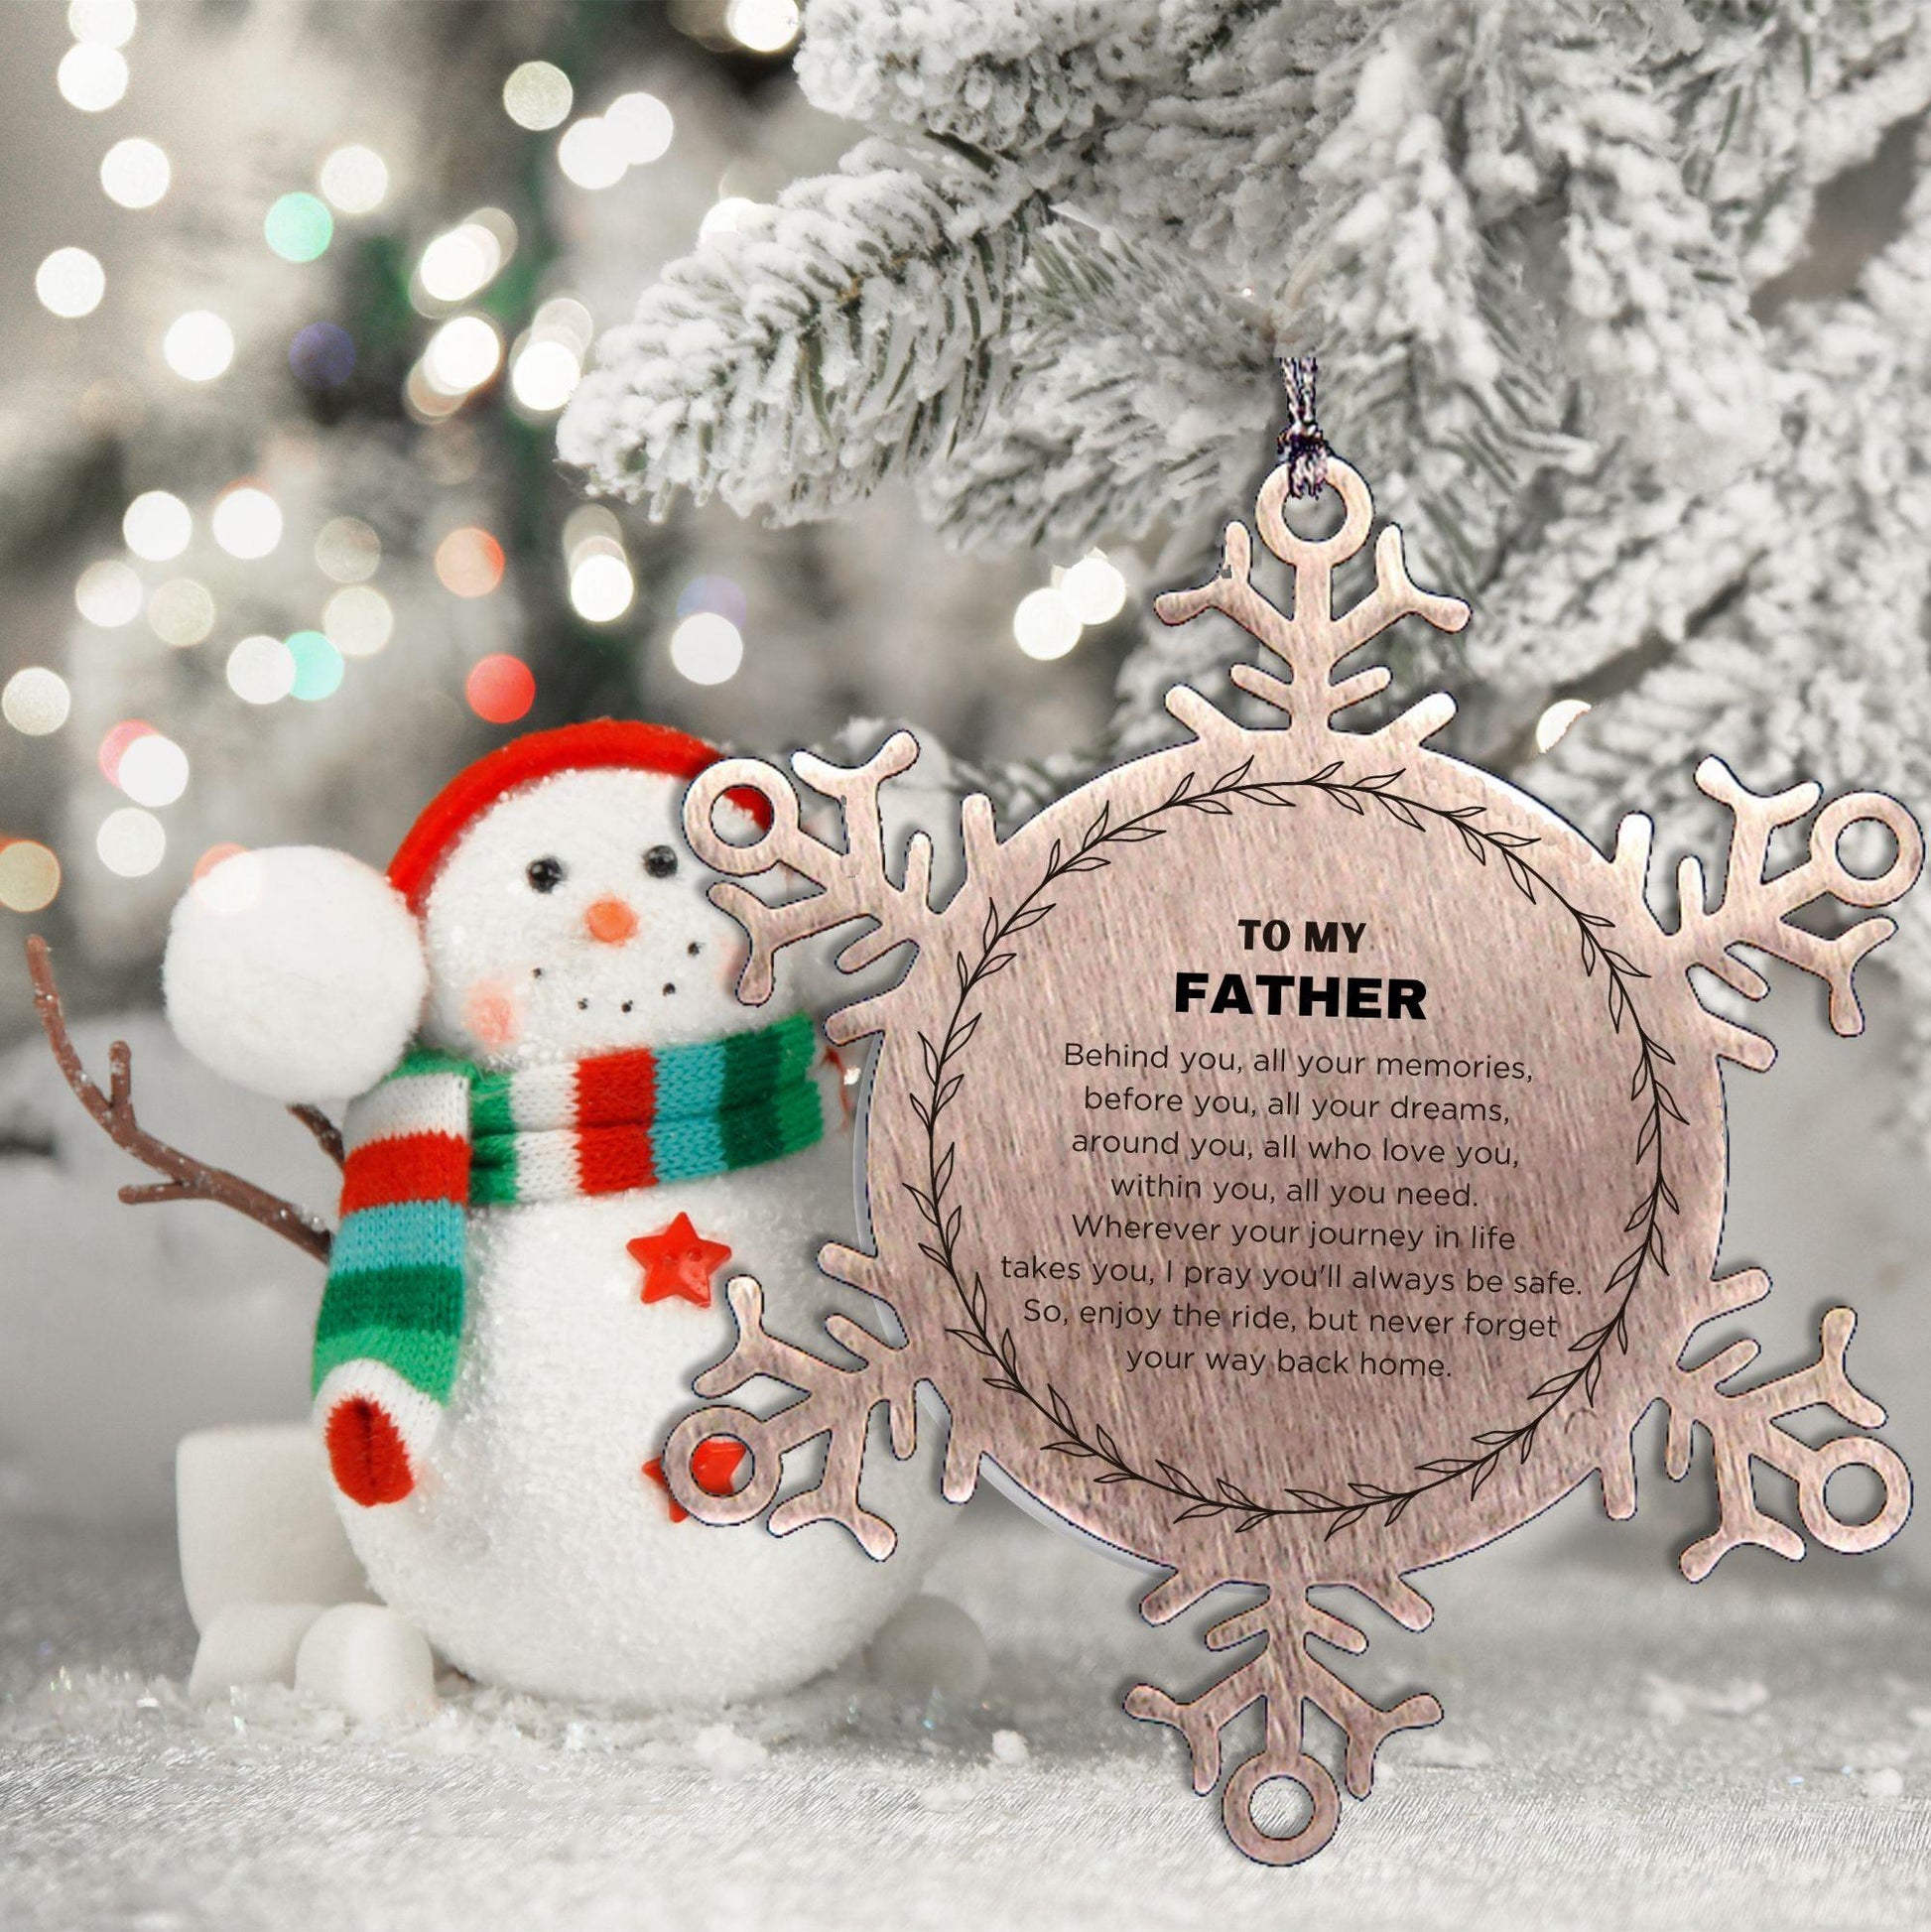 Inspirational Father Snowflake Ornament - Behind you, all your Memories, Before you, all your Dreams - Birthday, Christmas Holiday Gifts - Mallard Moon Gift Shop